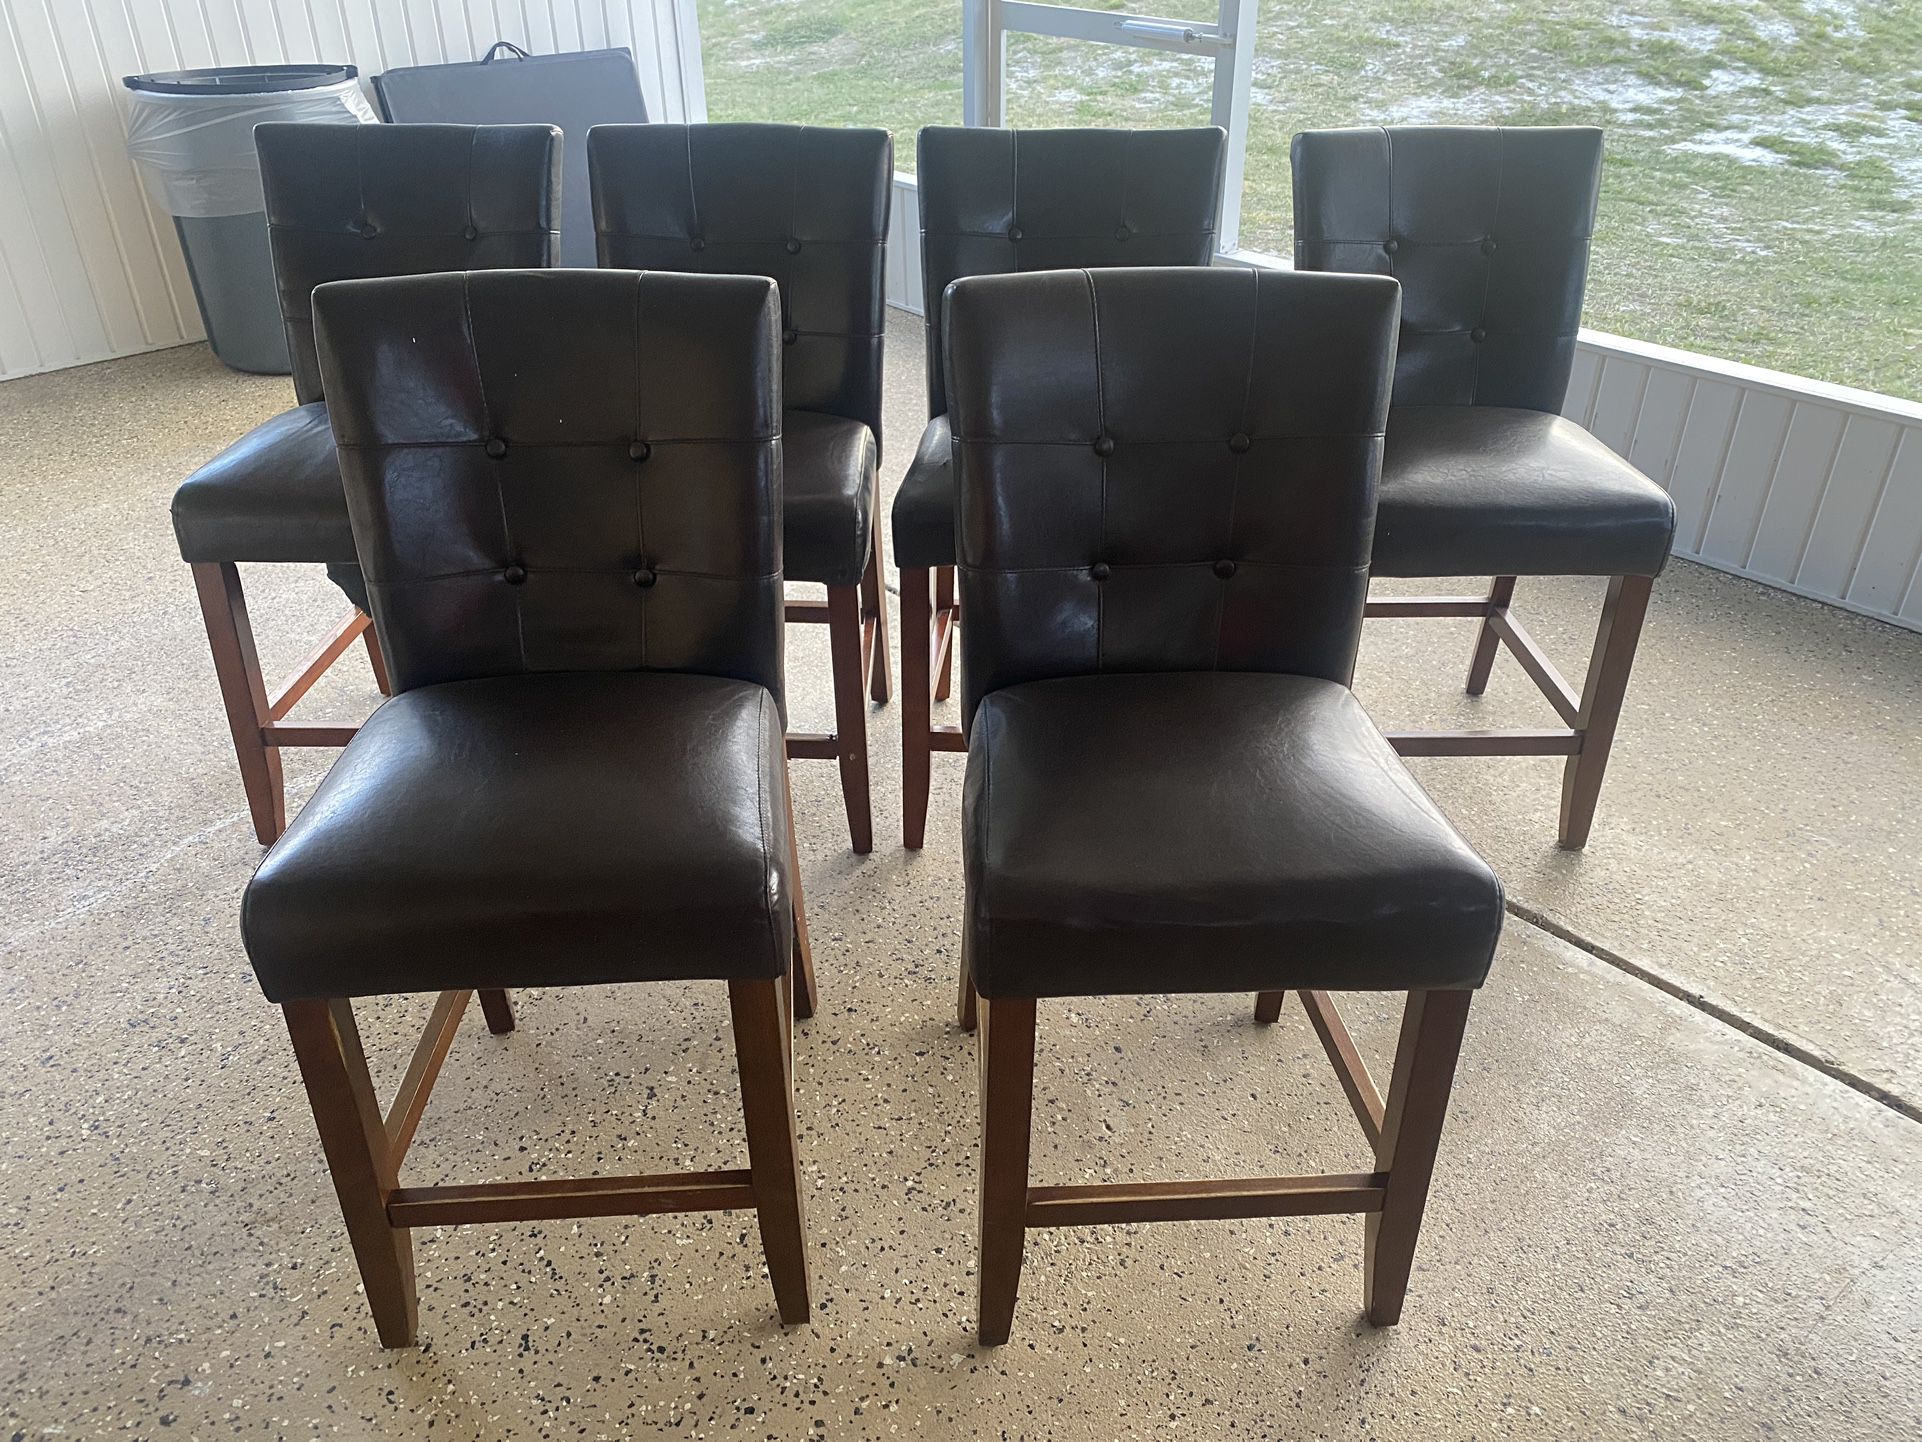 6 High Top Chairs $175 OBO 